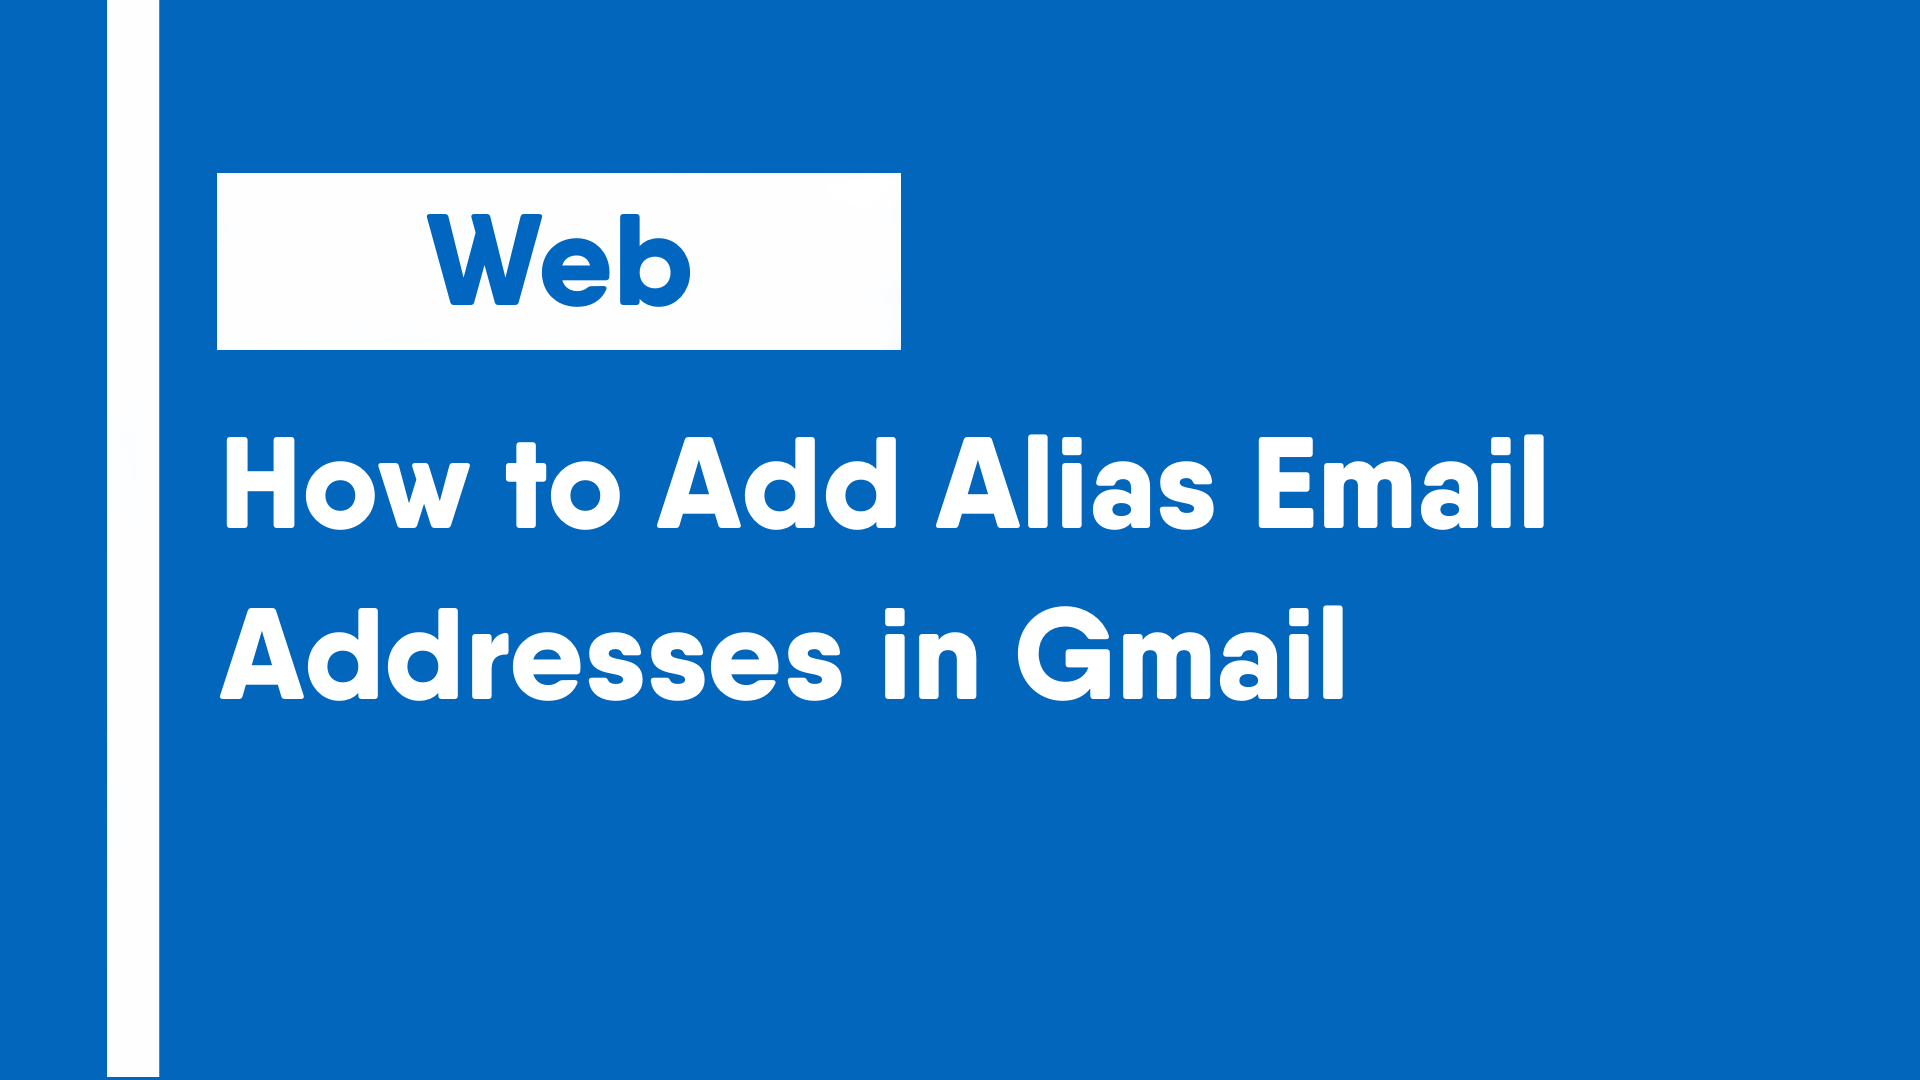 How to Add Alias Email Addresses in Gmail